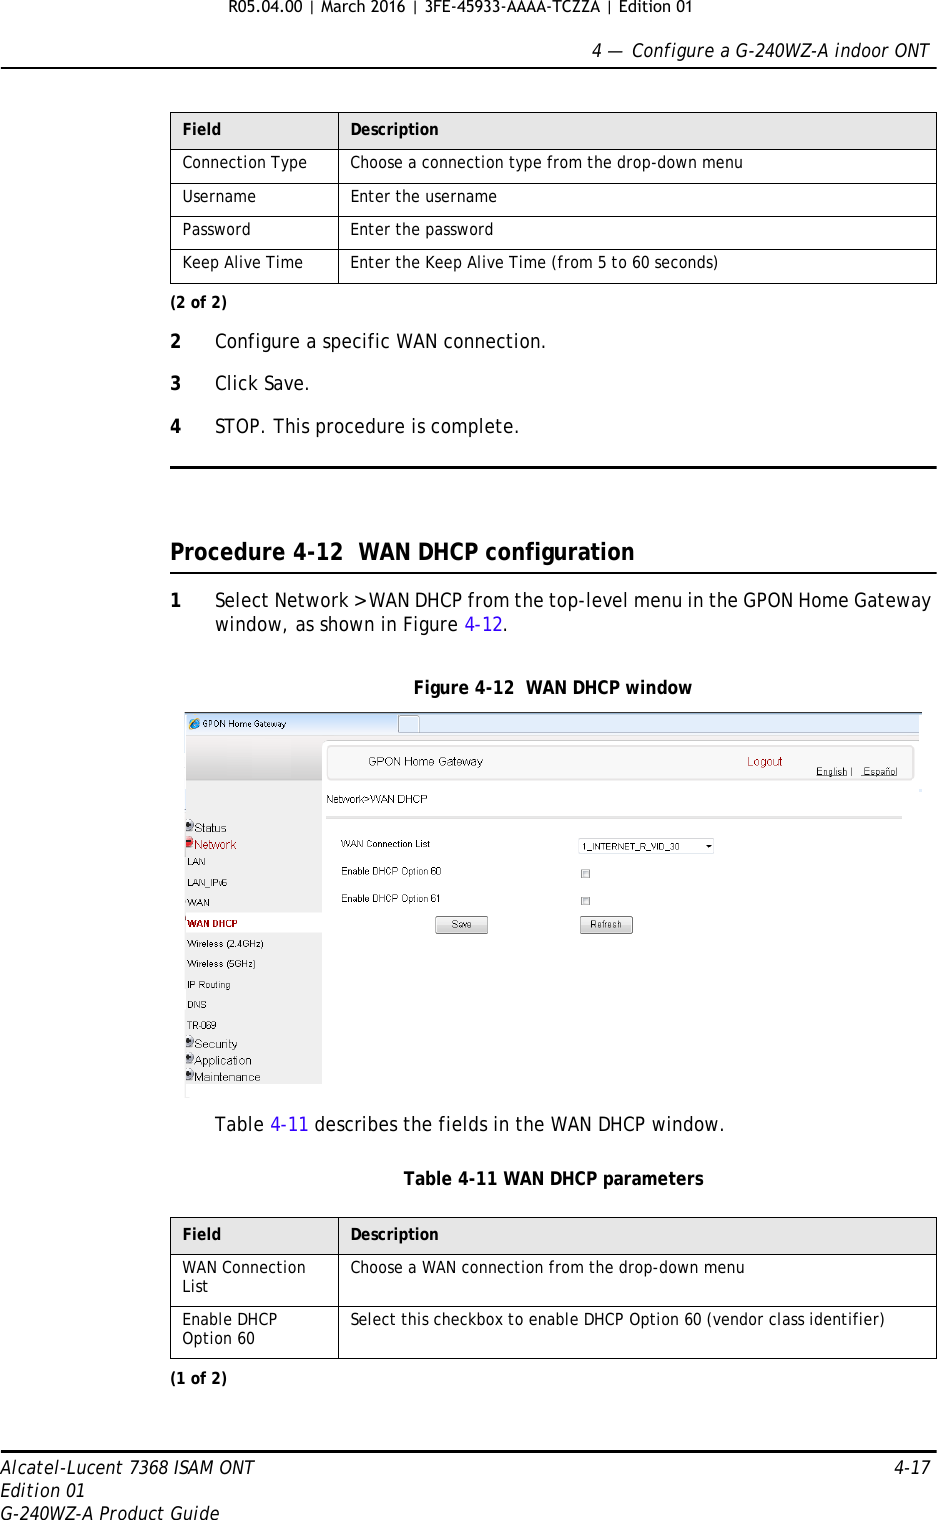 4 —  Configure a G-240WZ-A indoor ONTAlcatel-Lucent 7368 ISAM ONT 4-17Edition 01G-240WZ-A Product Guide2Configure a specific WAN connection.3Click Save.4STOP. This procedure is complete.Procedure 4-12  WAN DHCP configuration1Select Network &gt; WAN DHCP from the top-level menu in the GPON Home Gateway window, as shown in Figure 4-12.Figure 4-12  WAN DHCP windowTable 4-11 describes the fields in the WAN DHCP window.Table 4-11 WAN DHCP parametersConnection Type Choose a connection type from the drop-down menuUsername Enter the usernamePassword Enter the passwordKeep Alive Time Enter the Keep Alive Time (from 5 to 60 seconds)Field DescriptionWAN Connection List Choose a WAN connection from the drop-down menu Enable DHCP Option 60 Select this checkbox to enable DHCP Option 60 (vendor class identifier)(1 of 2)Field Description(2 of 2)R05.04.00 | March 2016 | 3FE-45933-AAAA-TCZZA | Edition 01 